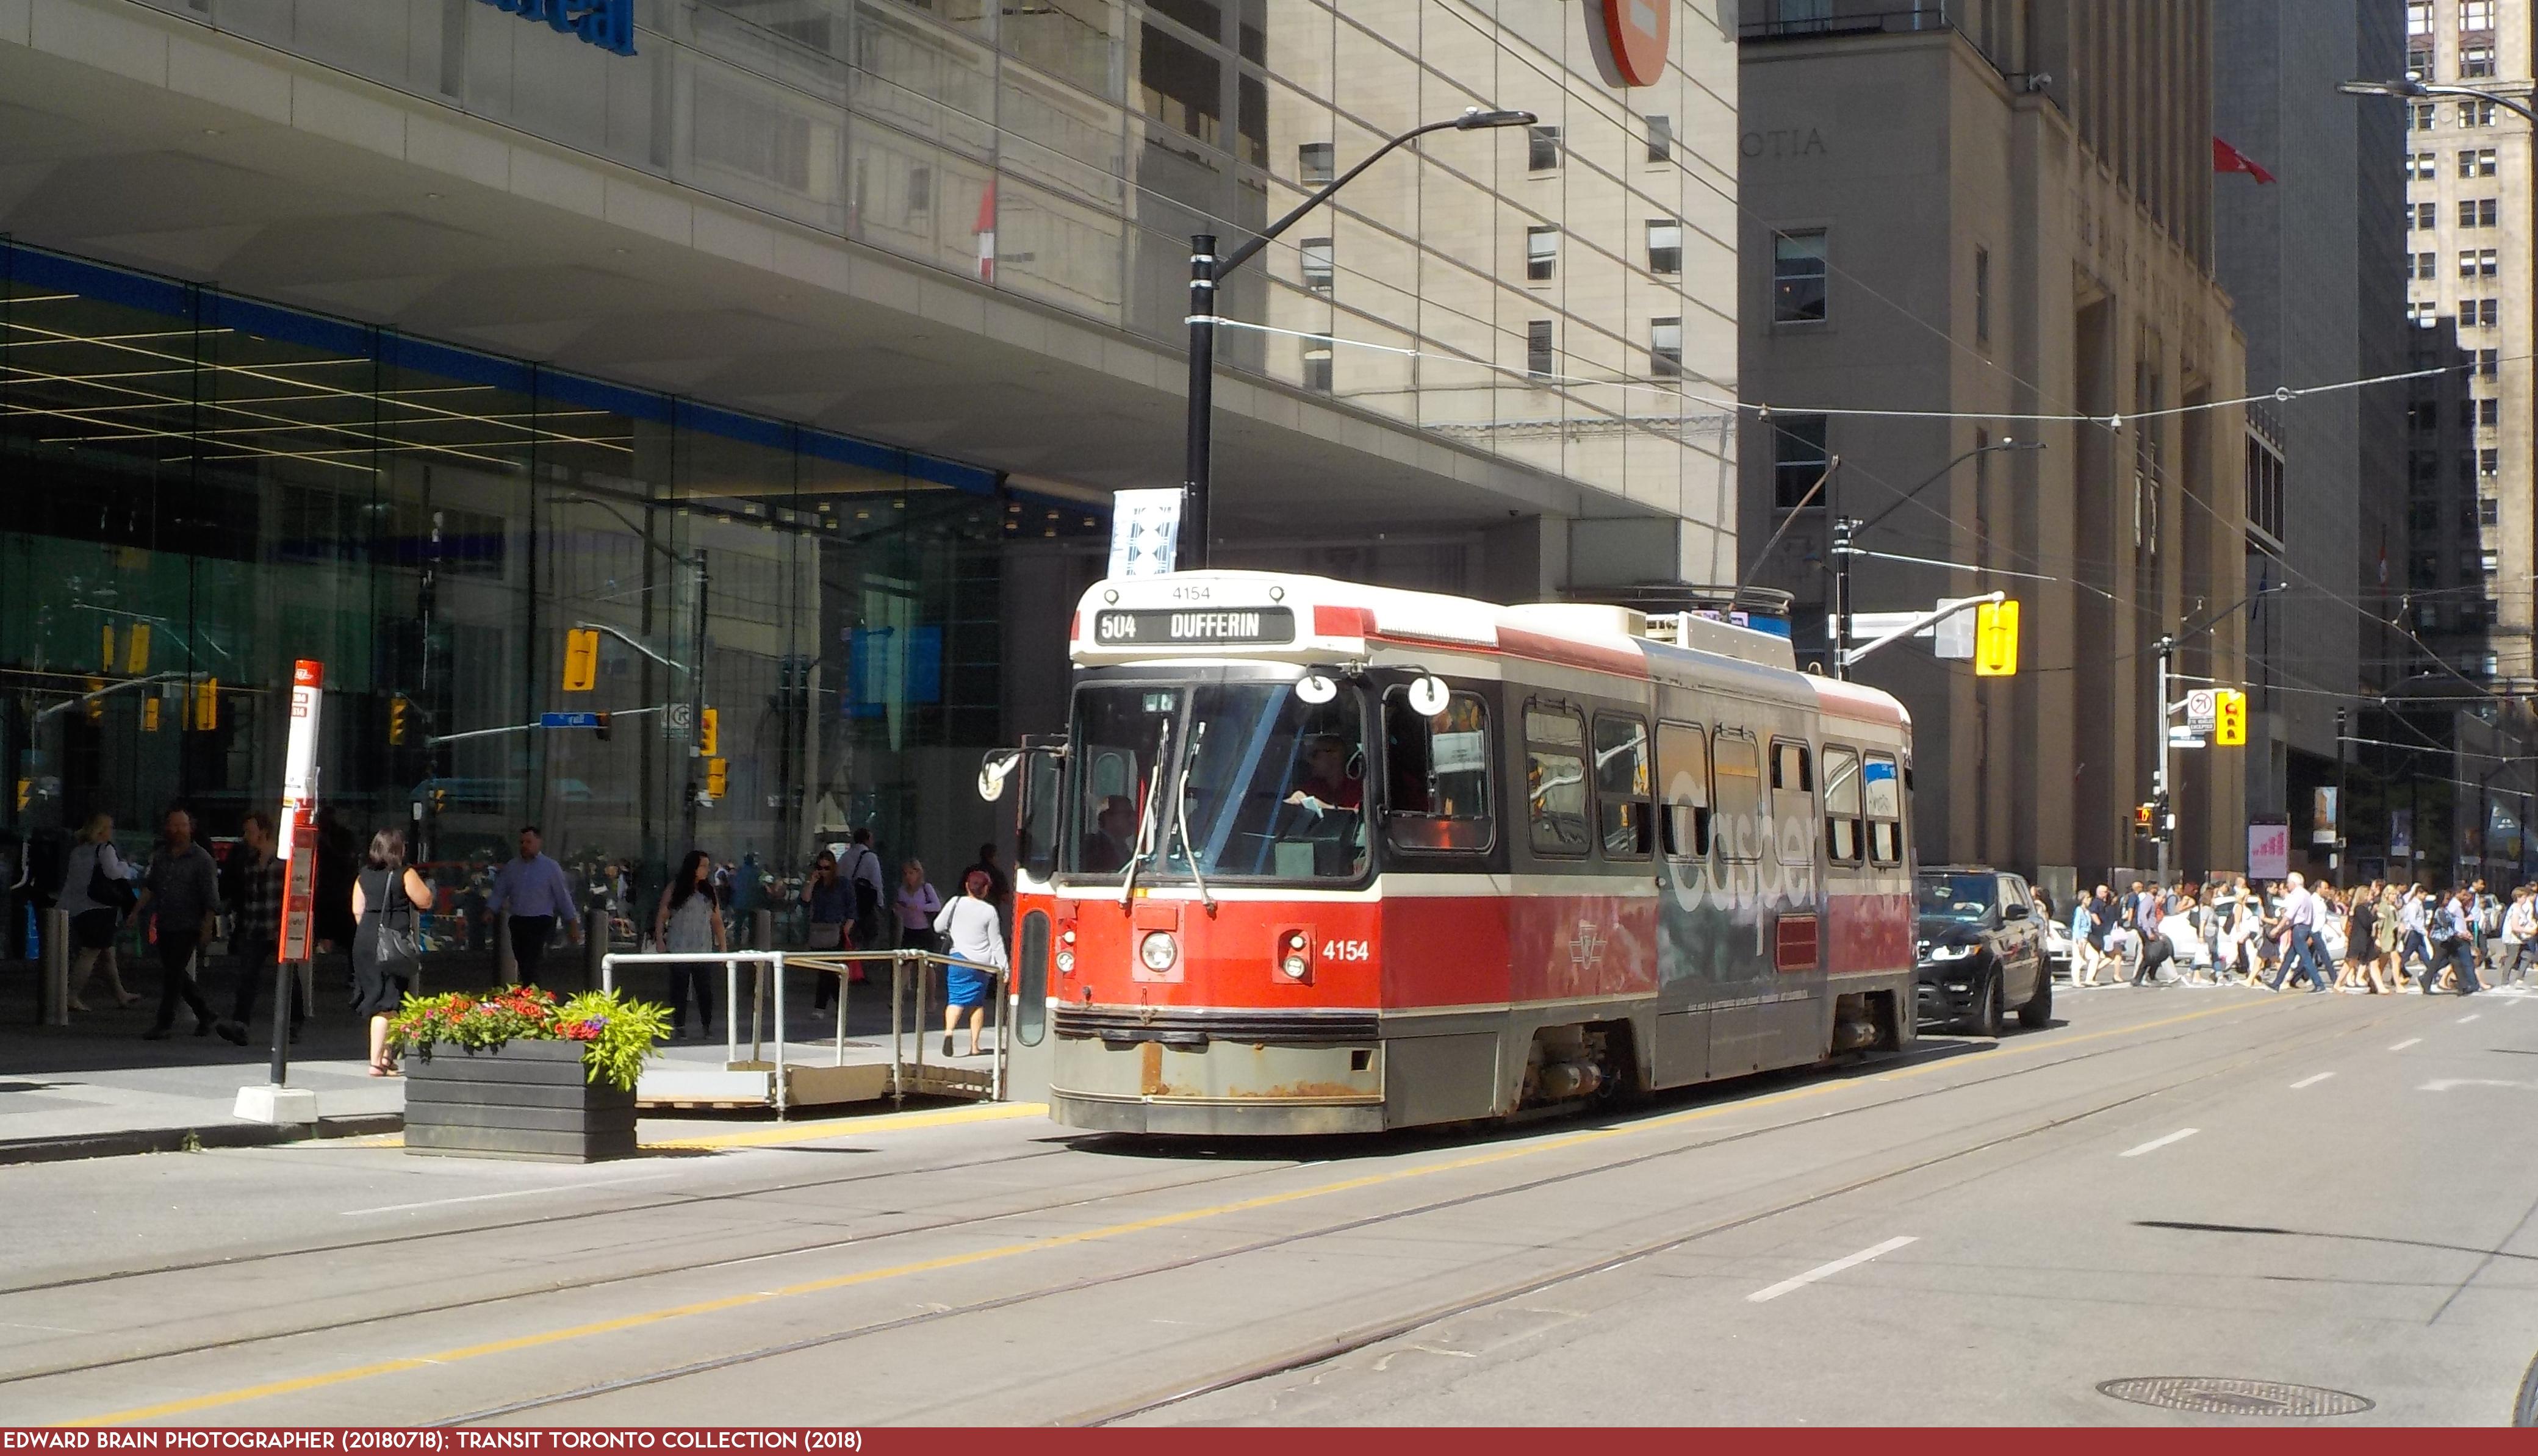 20180719 - 504 King - 4154 WB on King Past Bay